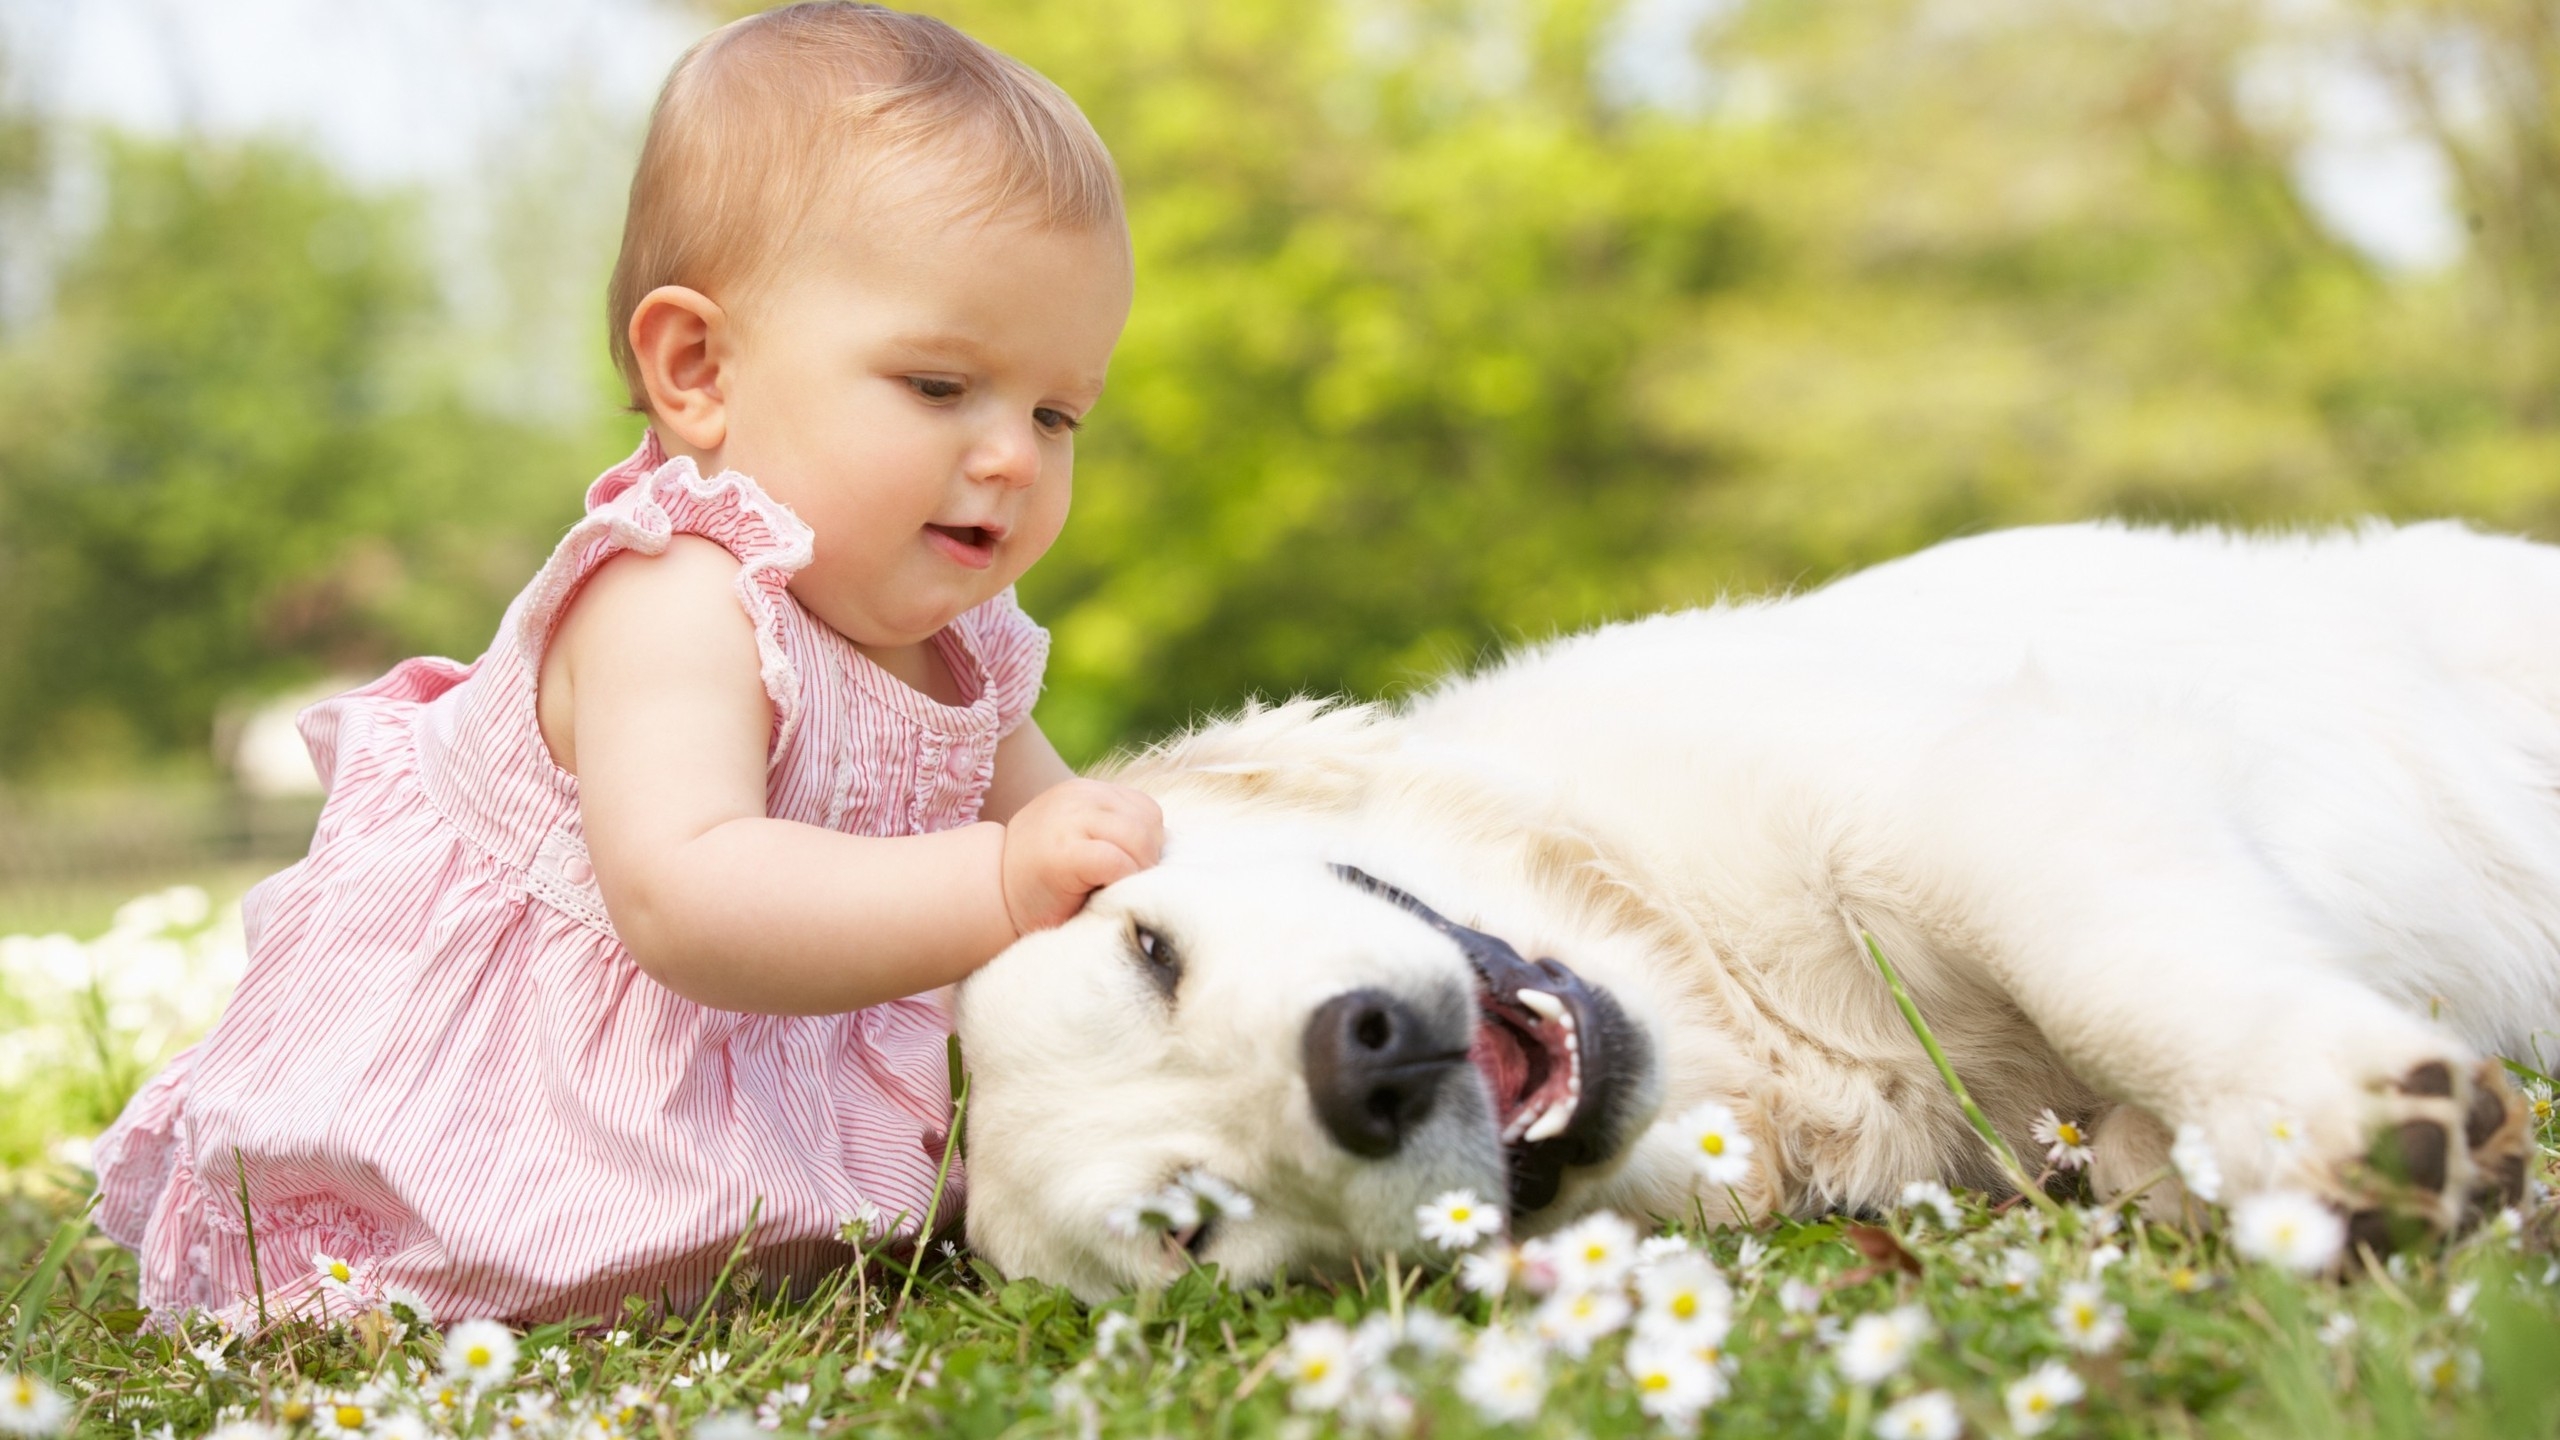 Cute Little Girl Playing With Dog for 2560x1440 HDTV resolution